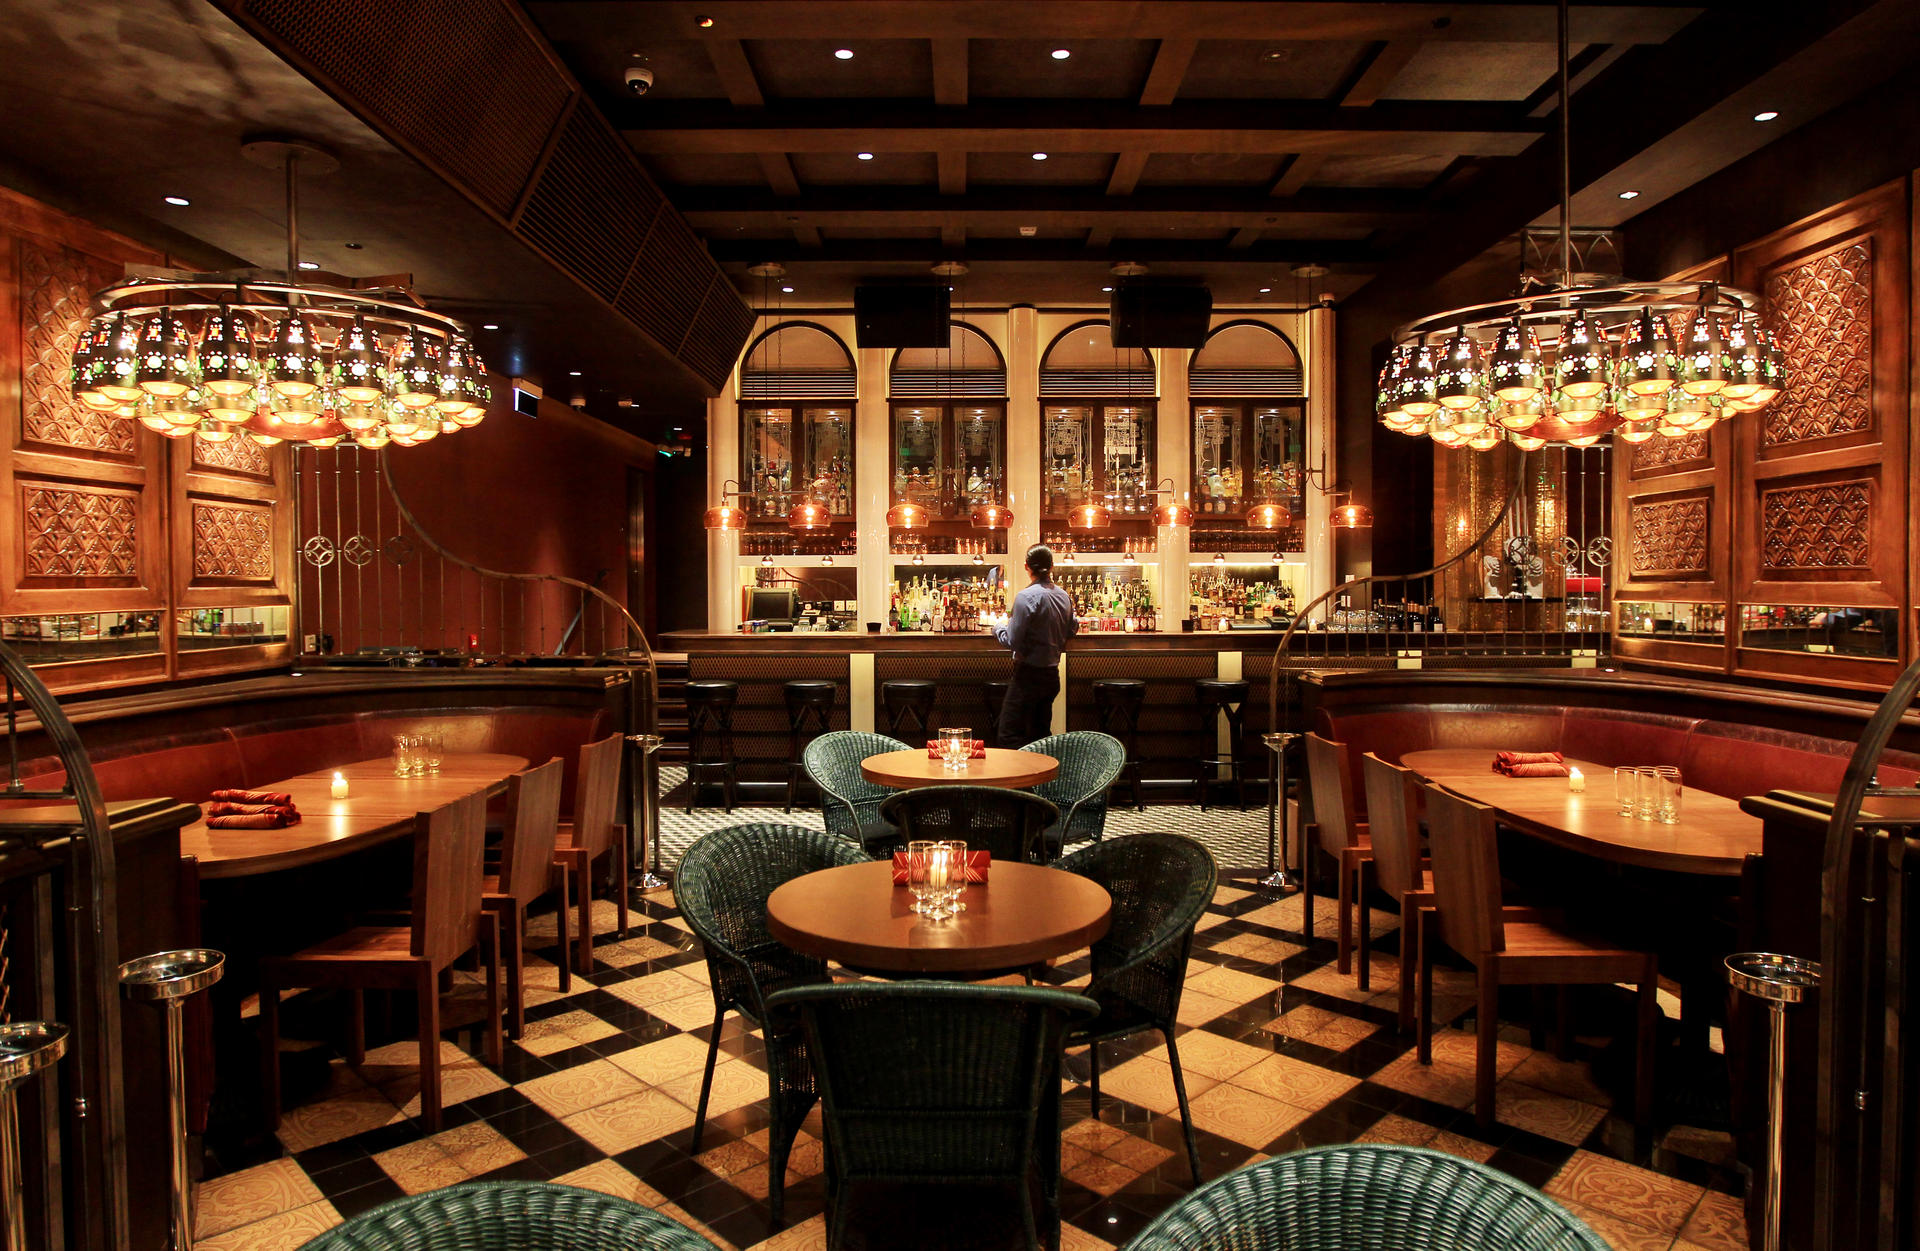 The bar and restaurant morphs into a club after dinner service.Photo: Jonathan Wong